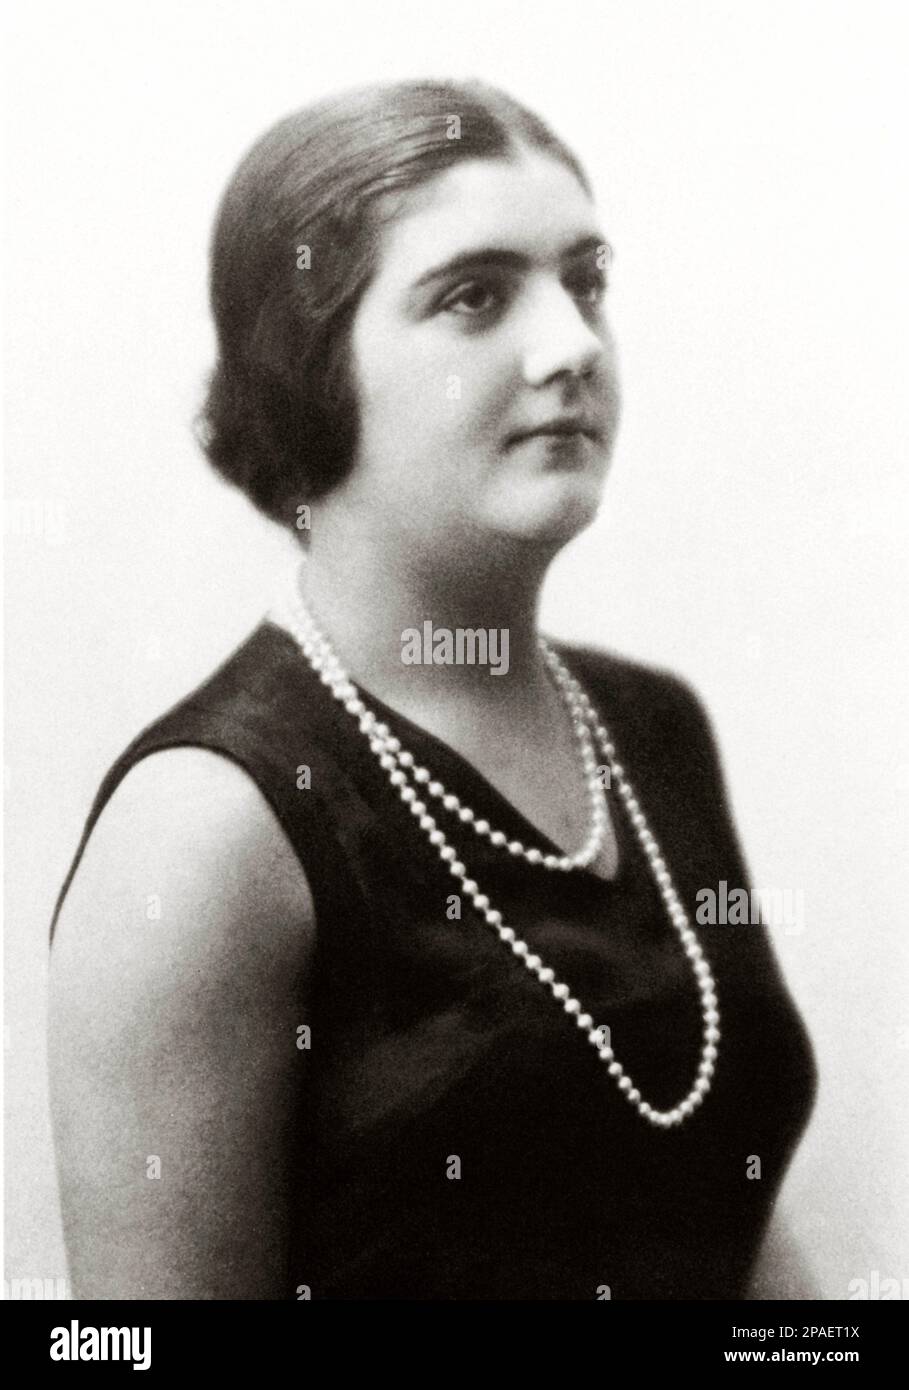 1948 , Milano , Italy : The italian Opera soprano singer MARIA CANIGLIA (May 5, 1905, Naples - April 16, 1979, Rome) at time of performing in FEDORA by Umberto Giordano at La Scala . When her La Scala contract began in 1931, Caniglia found that she had been assigned only one role, that of Maria in Ildebrando Pizzetti's Lo straniero with the composer conducting. In the aftermath of her performances, she found that she had been scheduled for other productions for the duration of the season. Her next assignment was the premiere of Italo Montemezzi's La notte di Zoraima, a work whose popularity pr Stock Photo